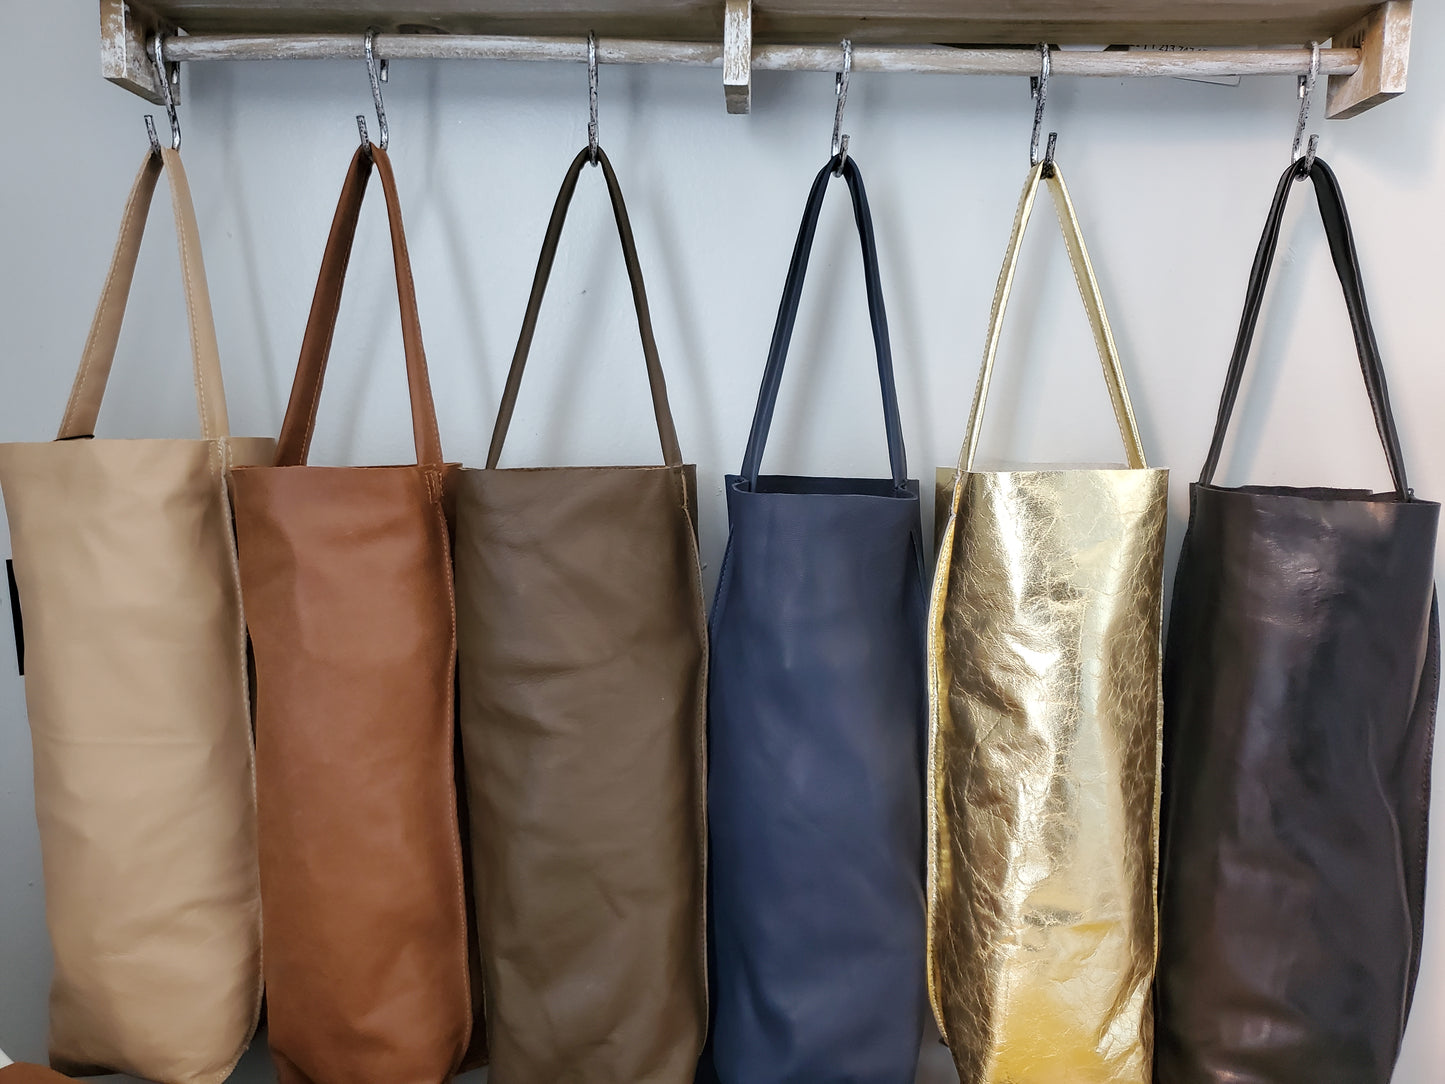 Leather wine bags in multi colors